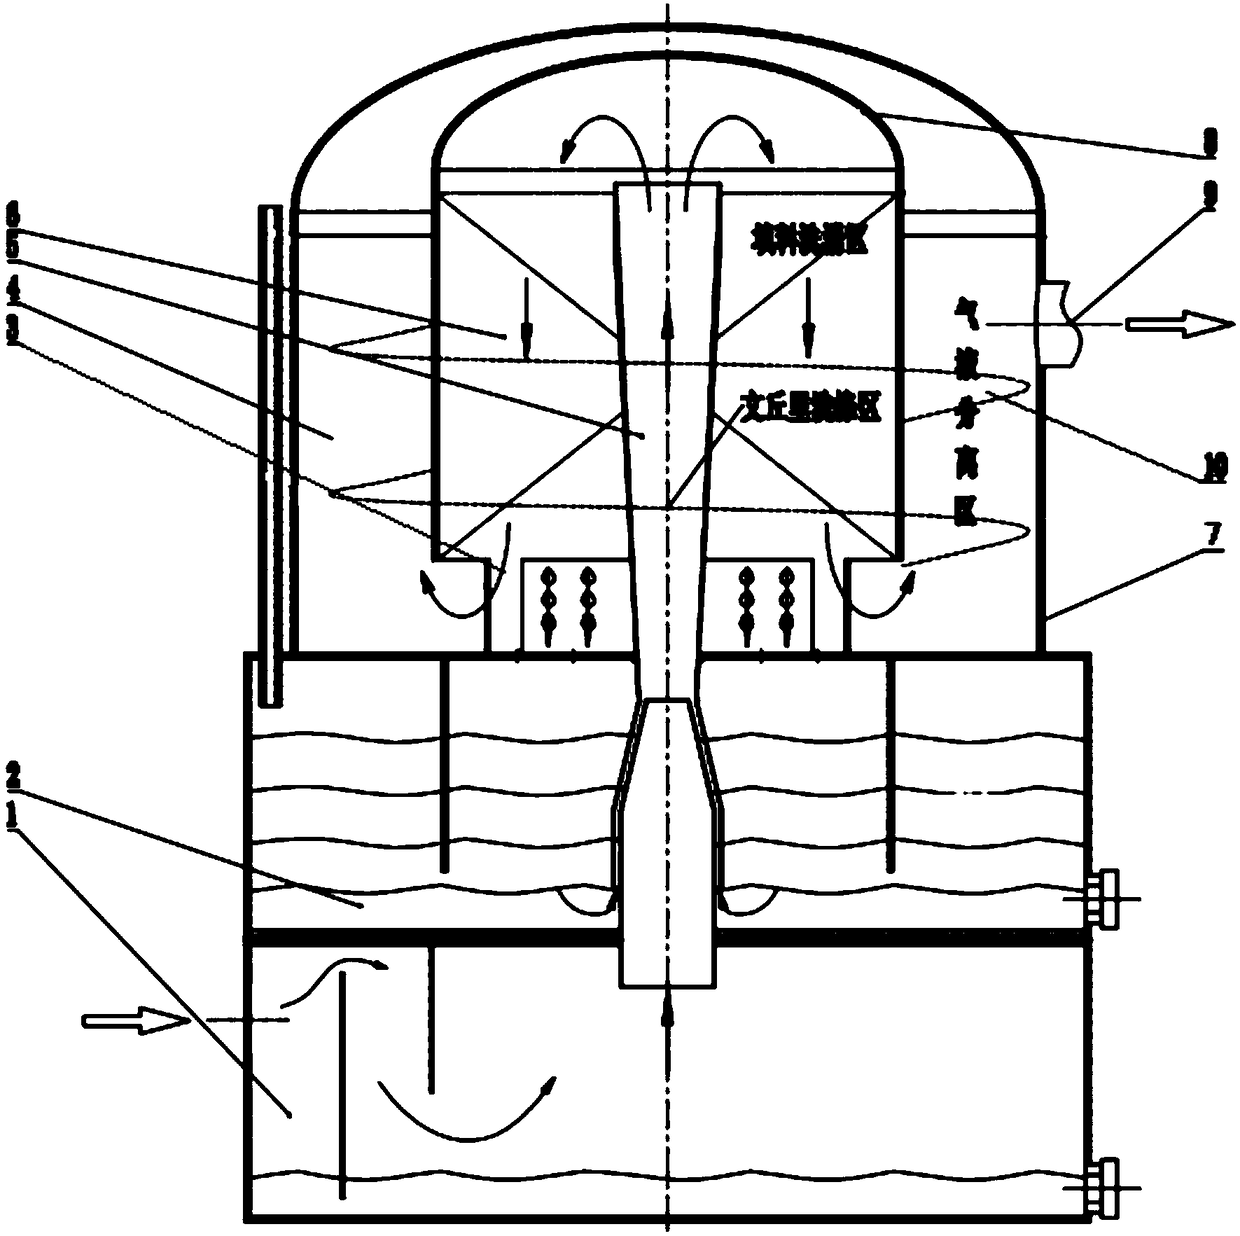 Self-priming packing decontamination device